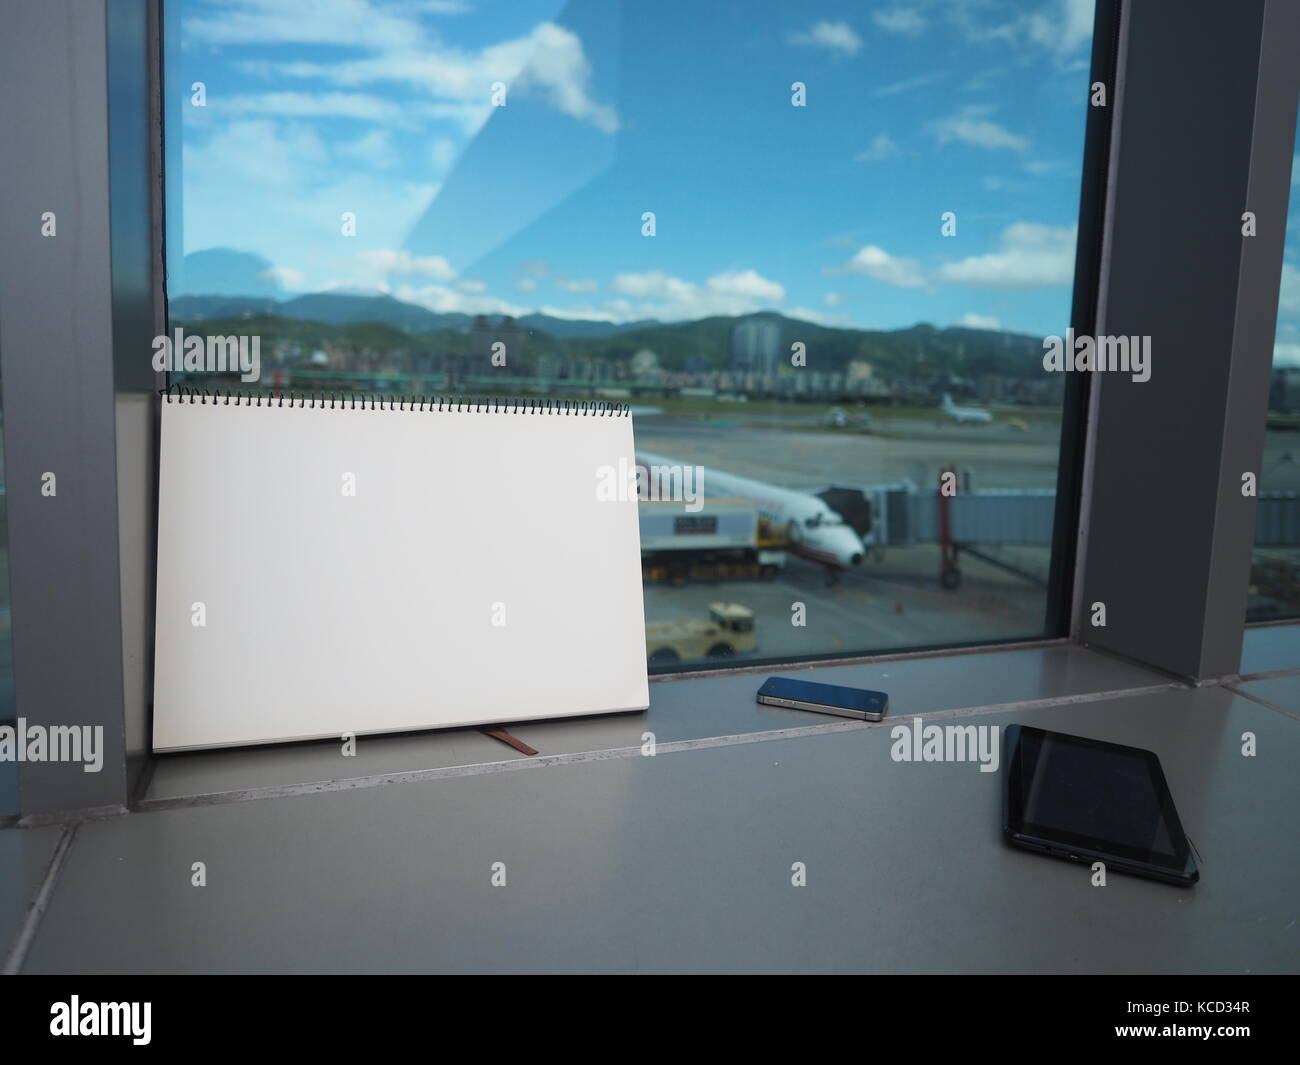 blank white note book  with smart phone at window at airport Stock Photo